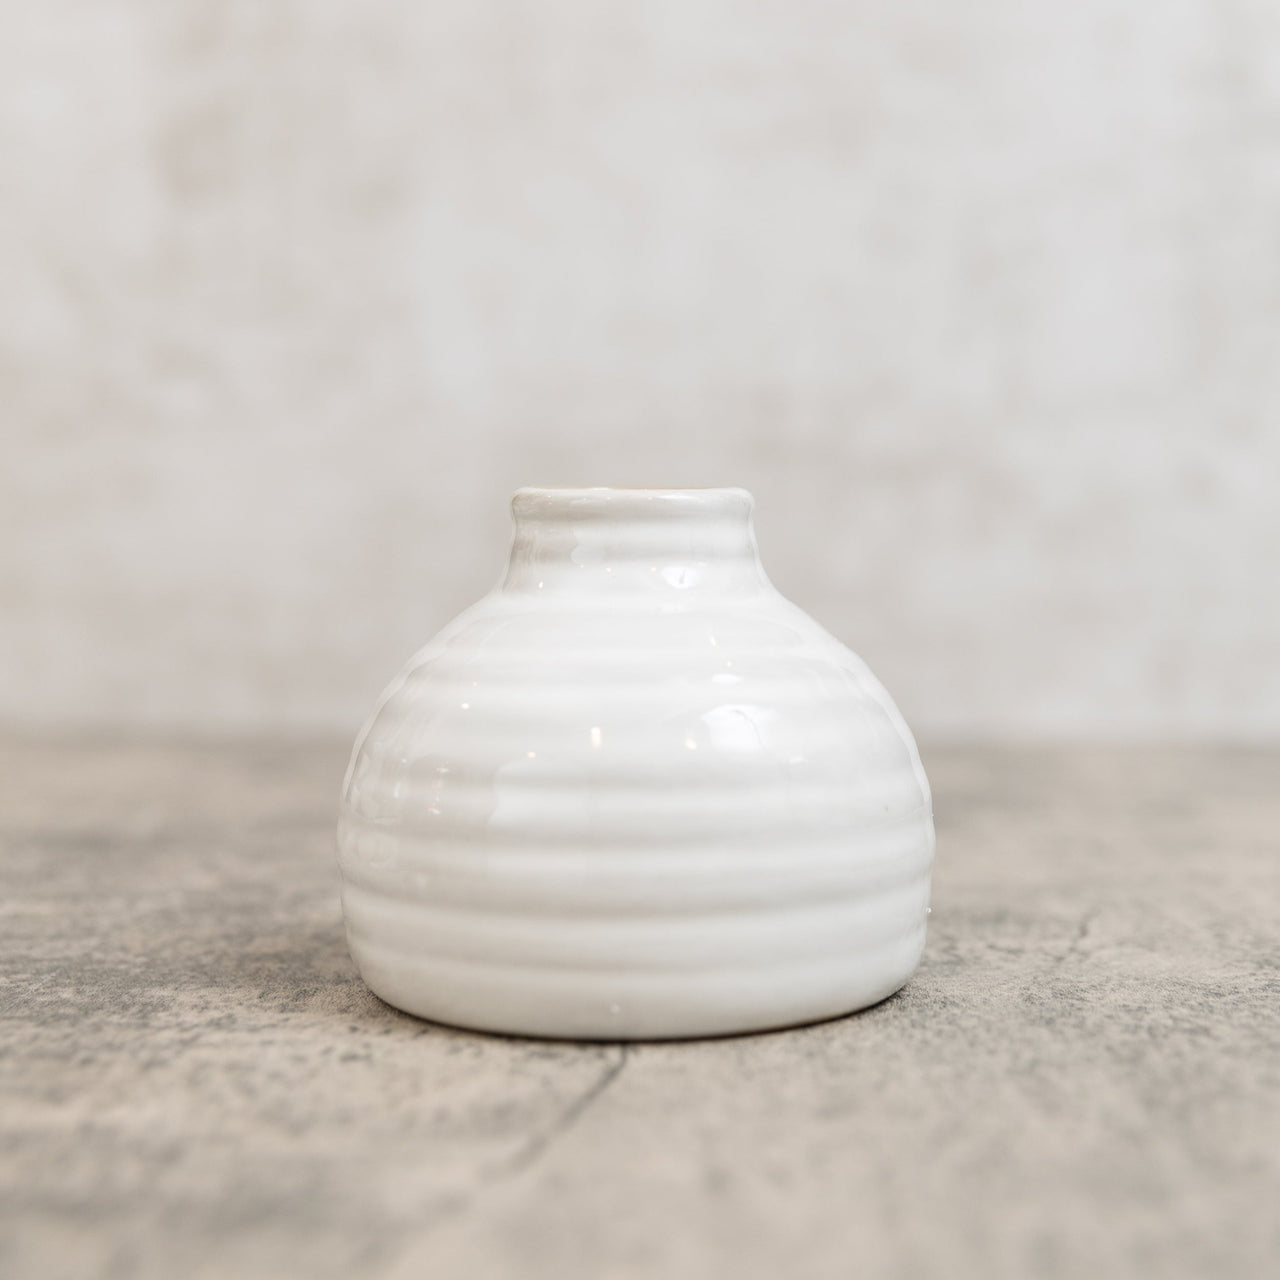 Small White Bud Vase  PD Home   